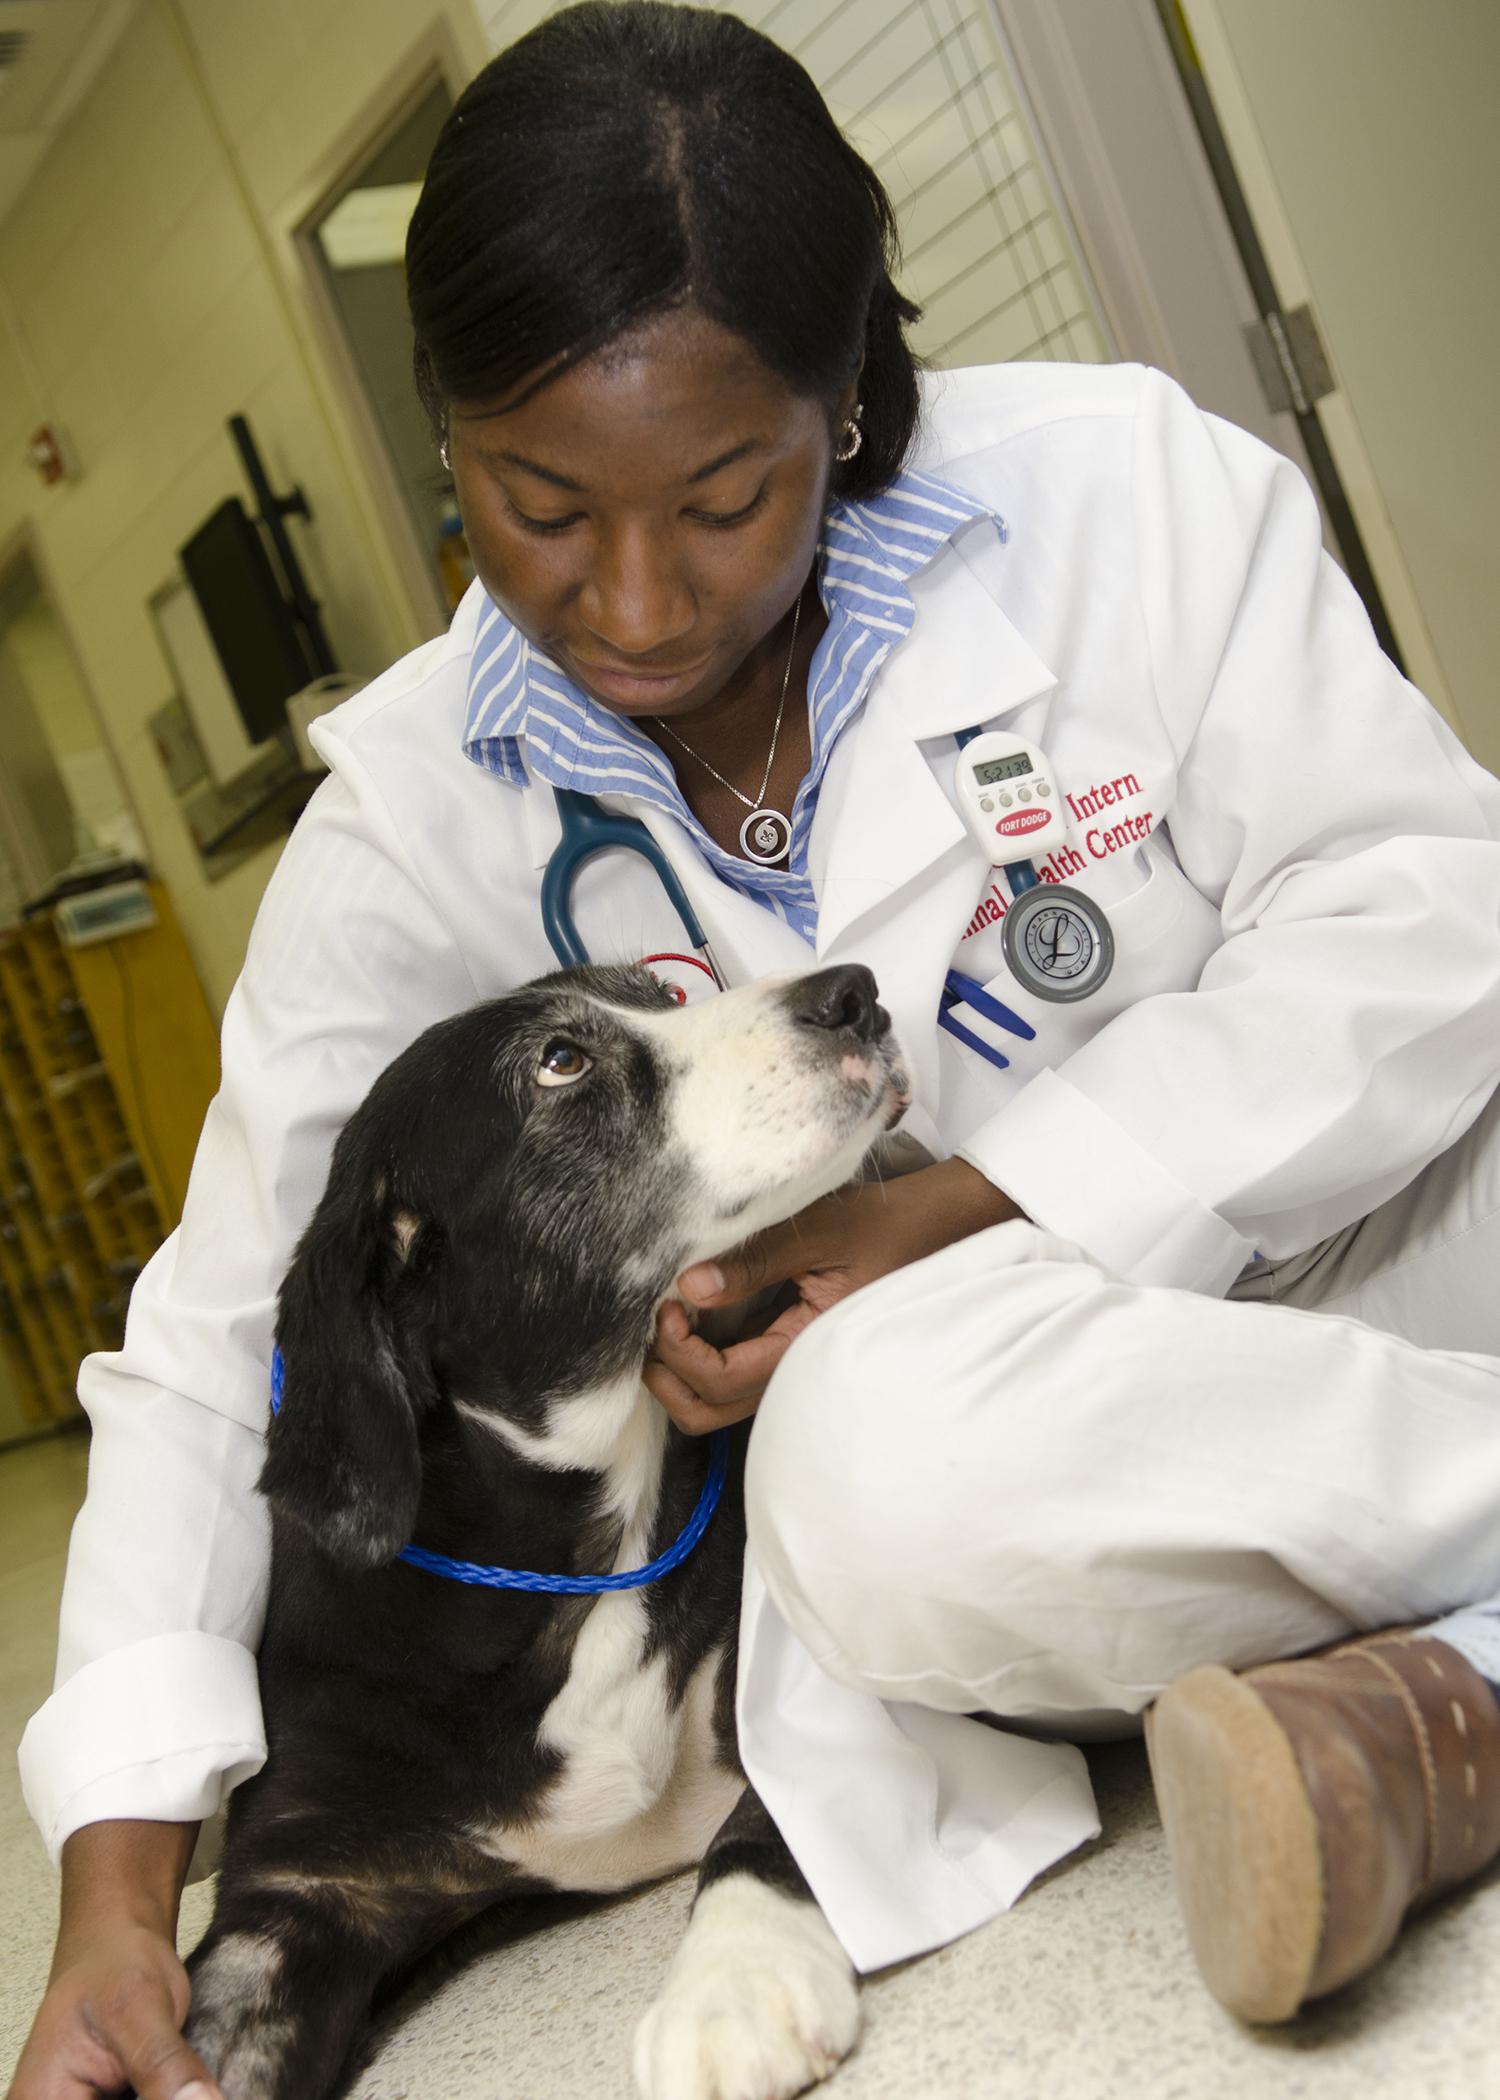 Dr. Talisha Moore, a former Freeman scholarship recipient and current intern at Mississippi State University's College of Veterinary Medicine, cares for patients and works to recruit minority students to the veterinary profession. (Photo by MSU College of Veterinary Medicine/Tom Thompson)